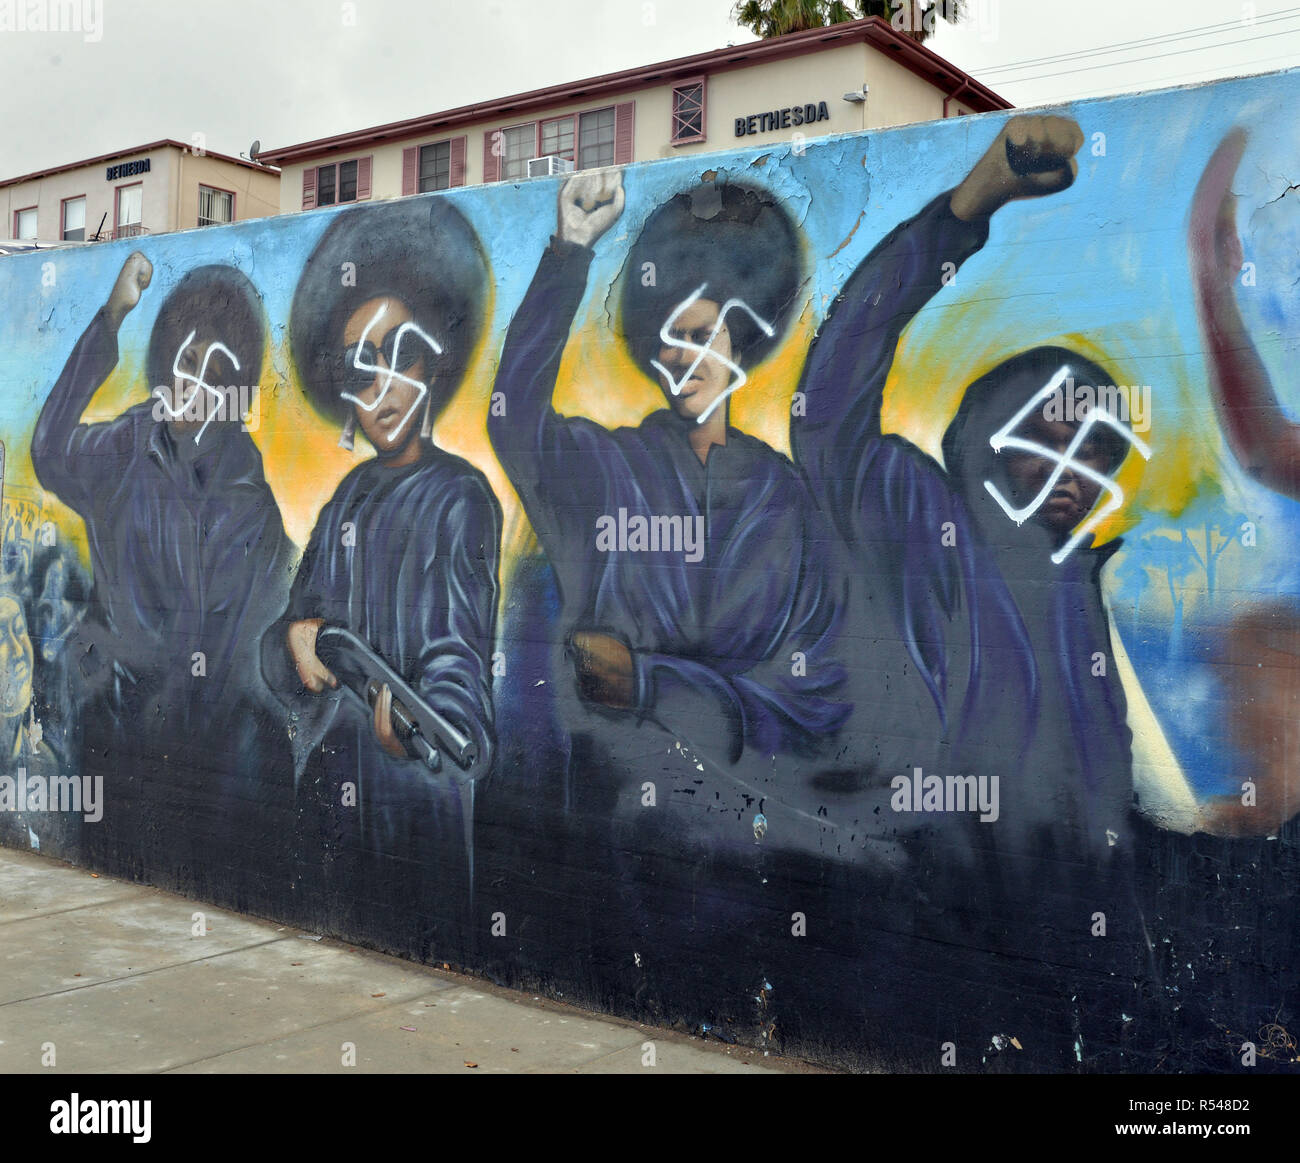 Los Angeles, Ca, USA. 29th Nov, 2018. The Crenshaw Wall Defaced with Swastika in Los Angeles, California on November 29, 2018. Credit: Koi Sojer/Snap'n U Photos/Media Punch/Alamy Live News Stock Photo